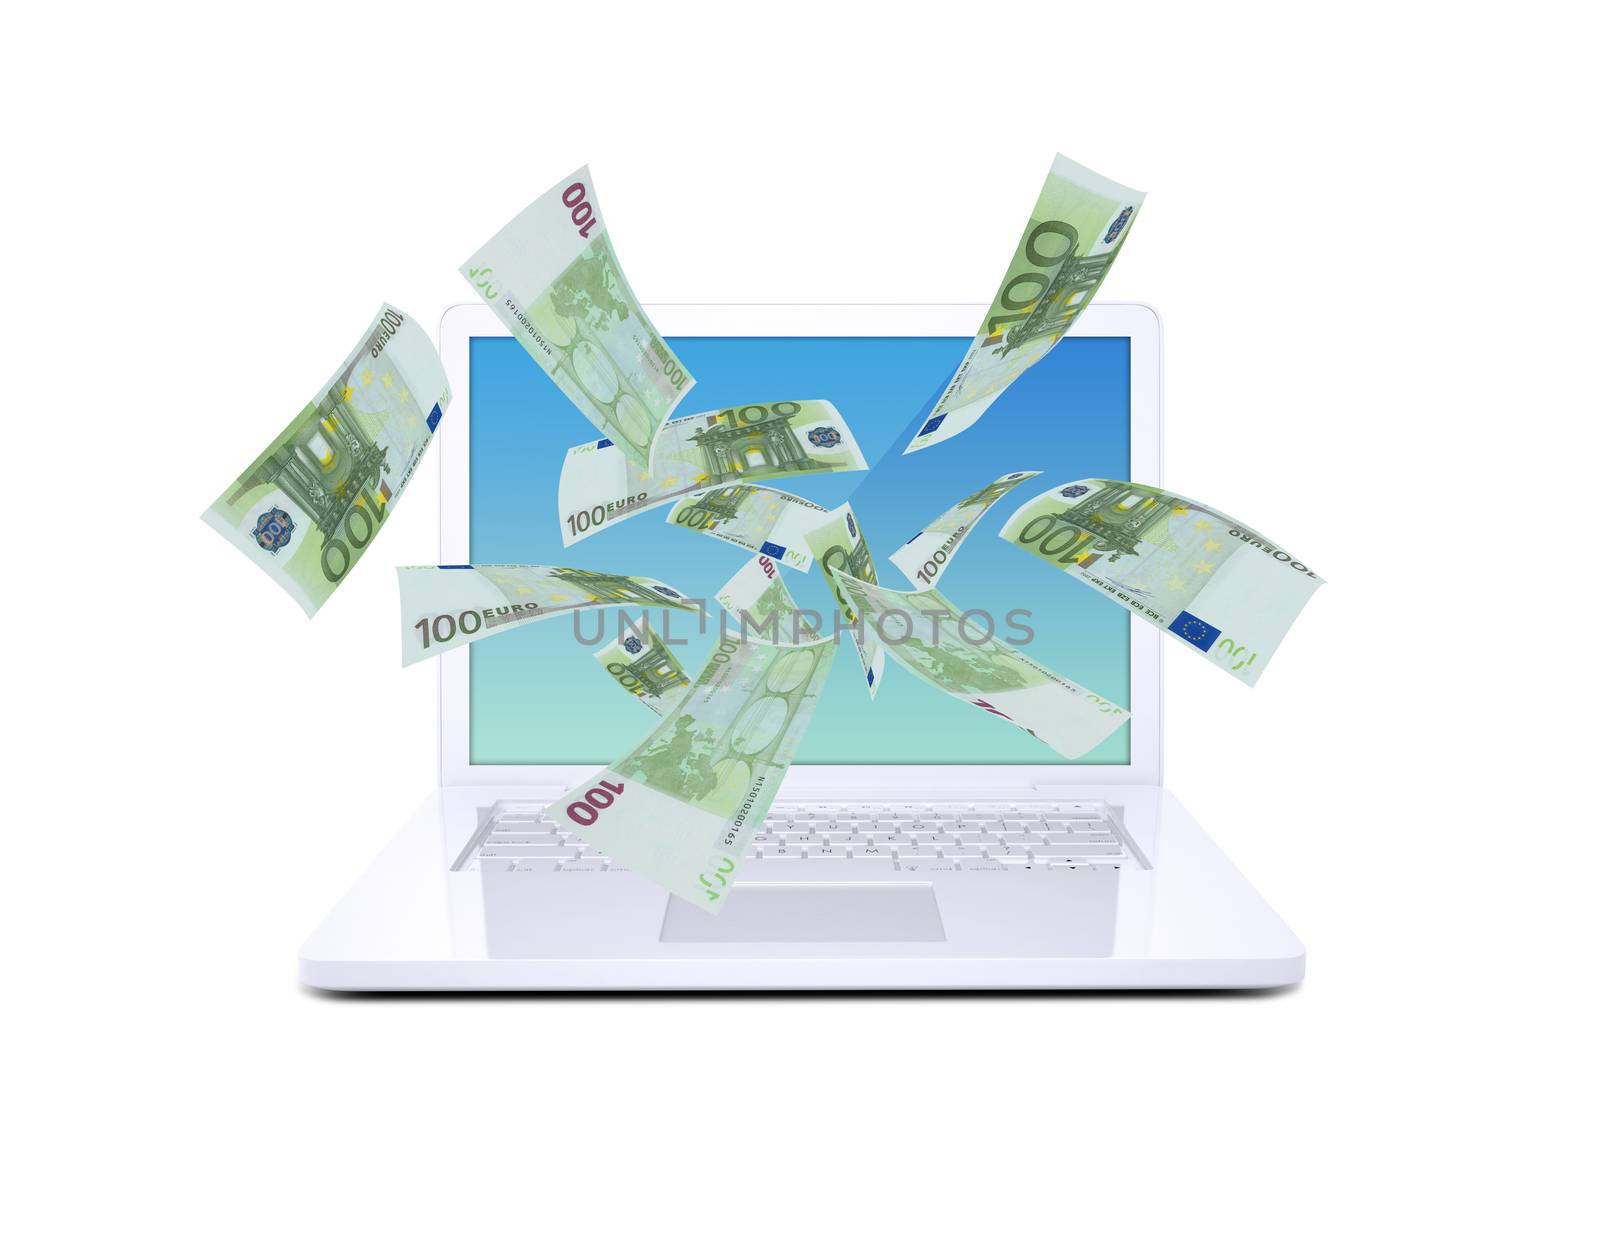 Euro notes flying around the laptop by cherezoff